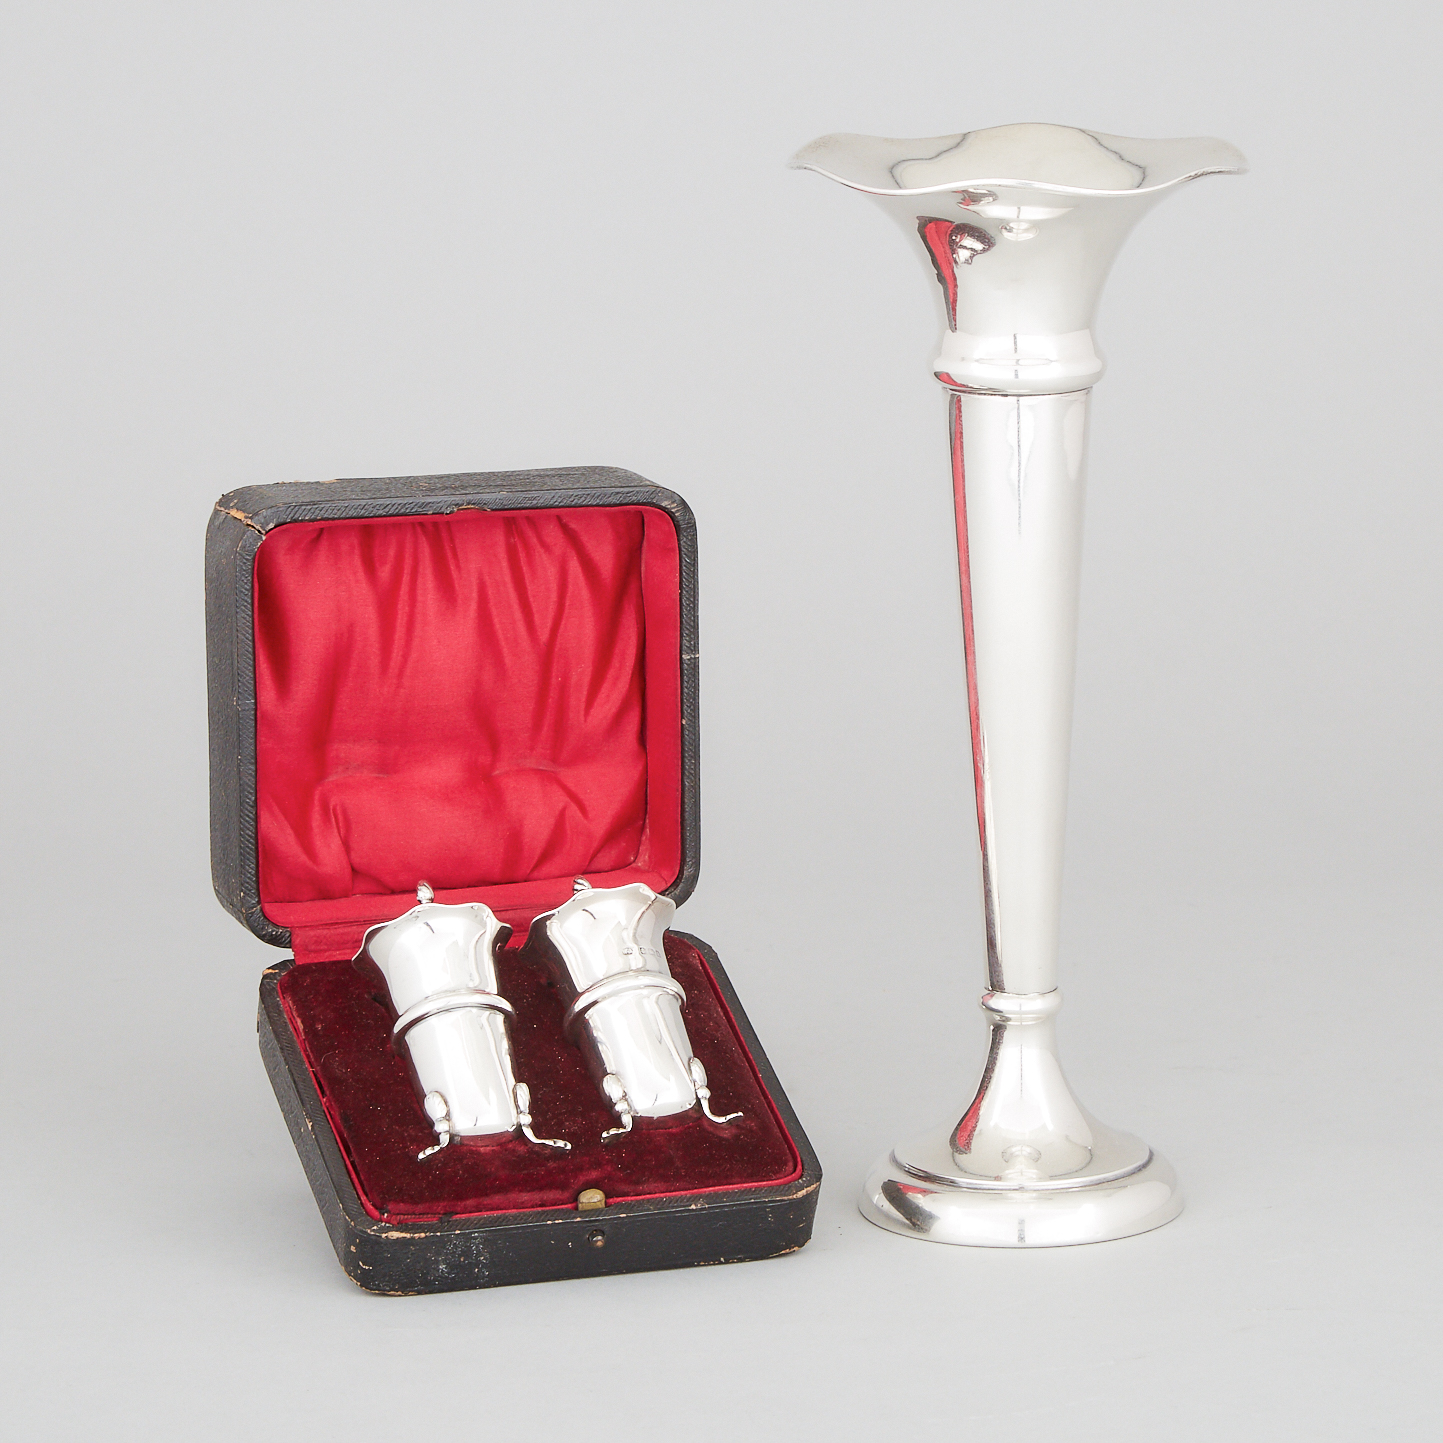 Canadian Silver Vase, Henry Birks & Sons, Montreal, Que., c.1904-24 and a Pair of Edwardian Pepper Casters, William Aitken, Birmingham, 1909